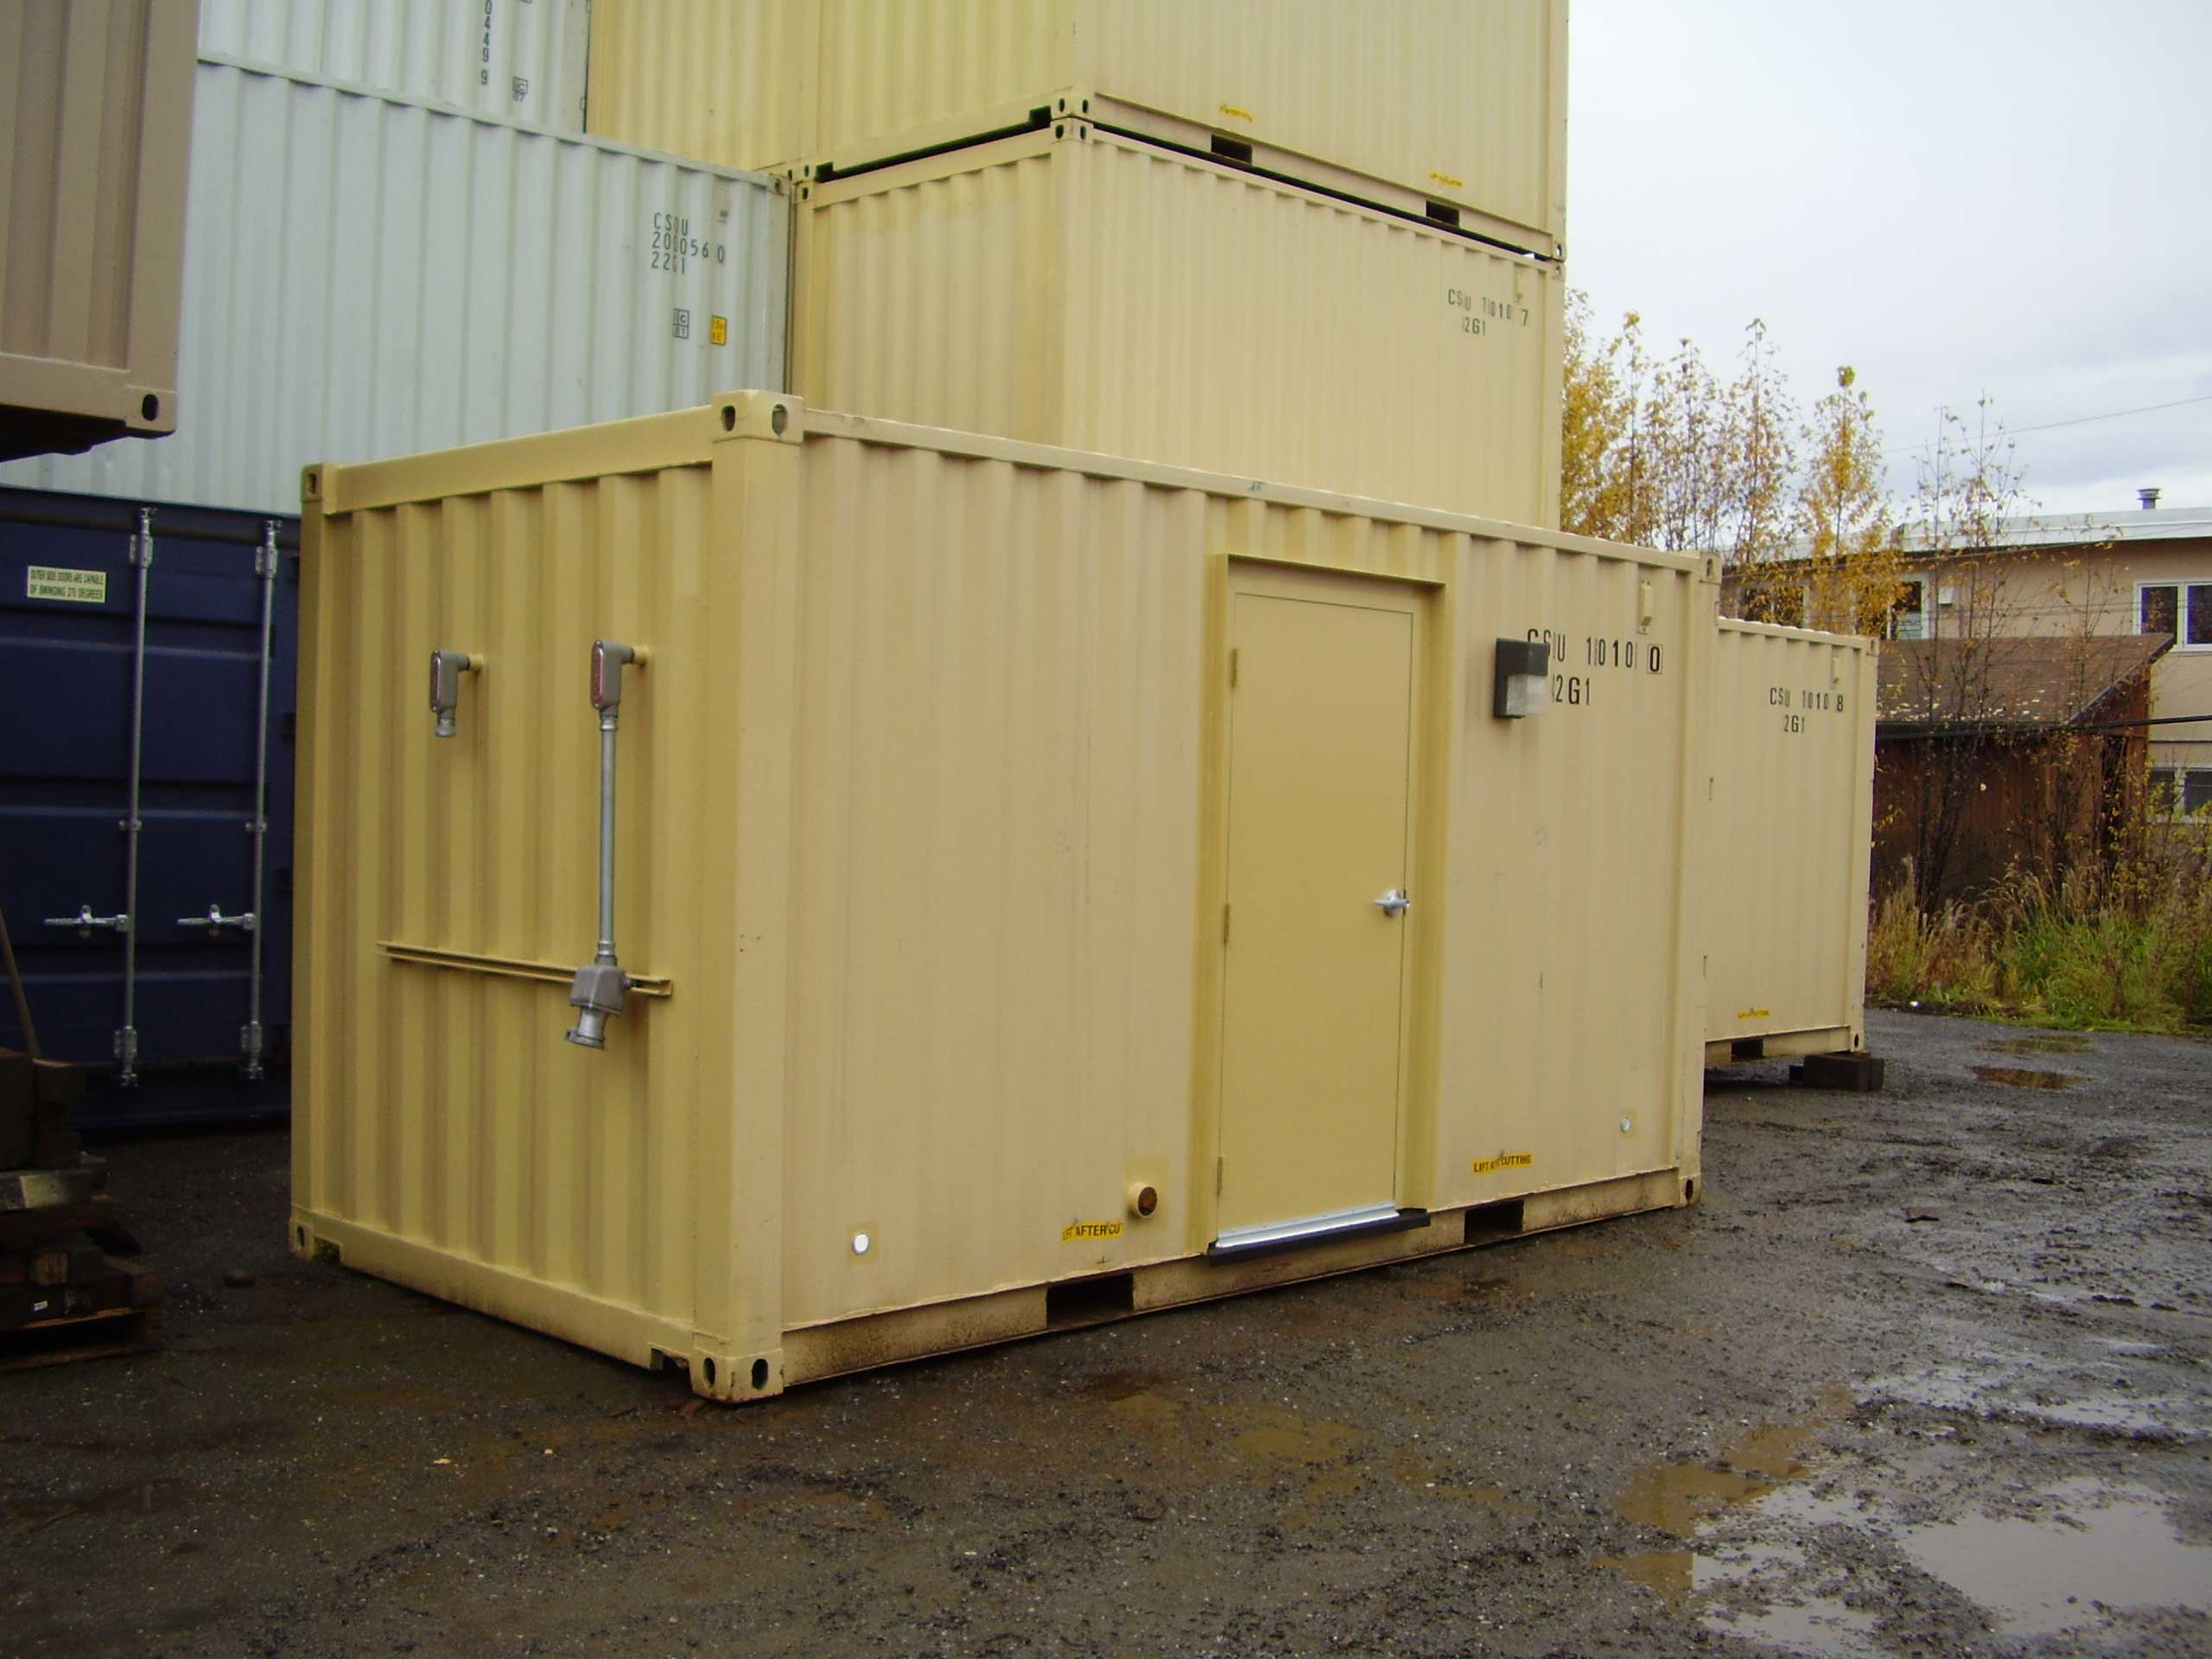 Off/onsite battery power container conversion project.  Provide battery power at remote locations using a container converted to a backup power source, such as this battery power container created for Pogo Mine.